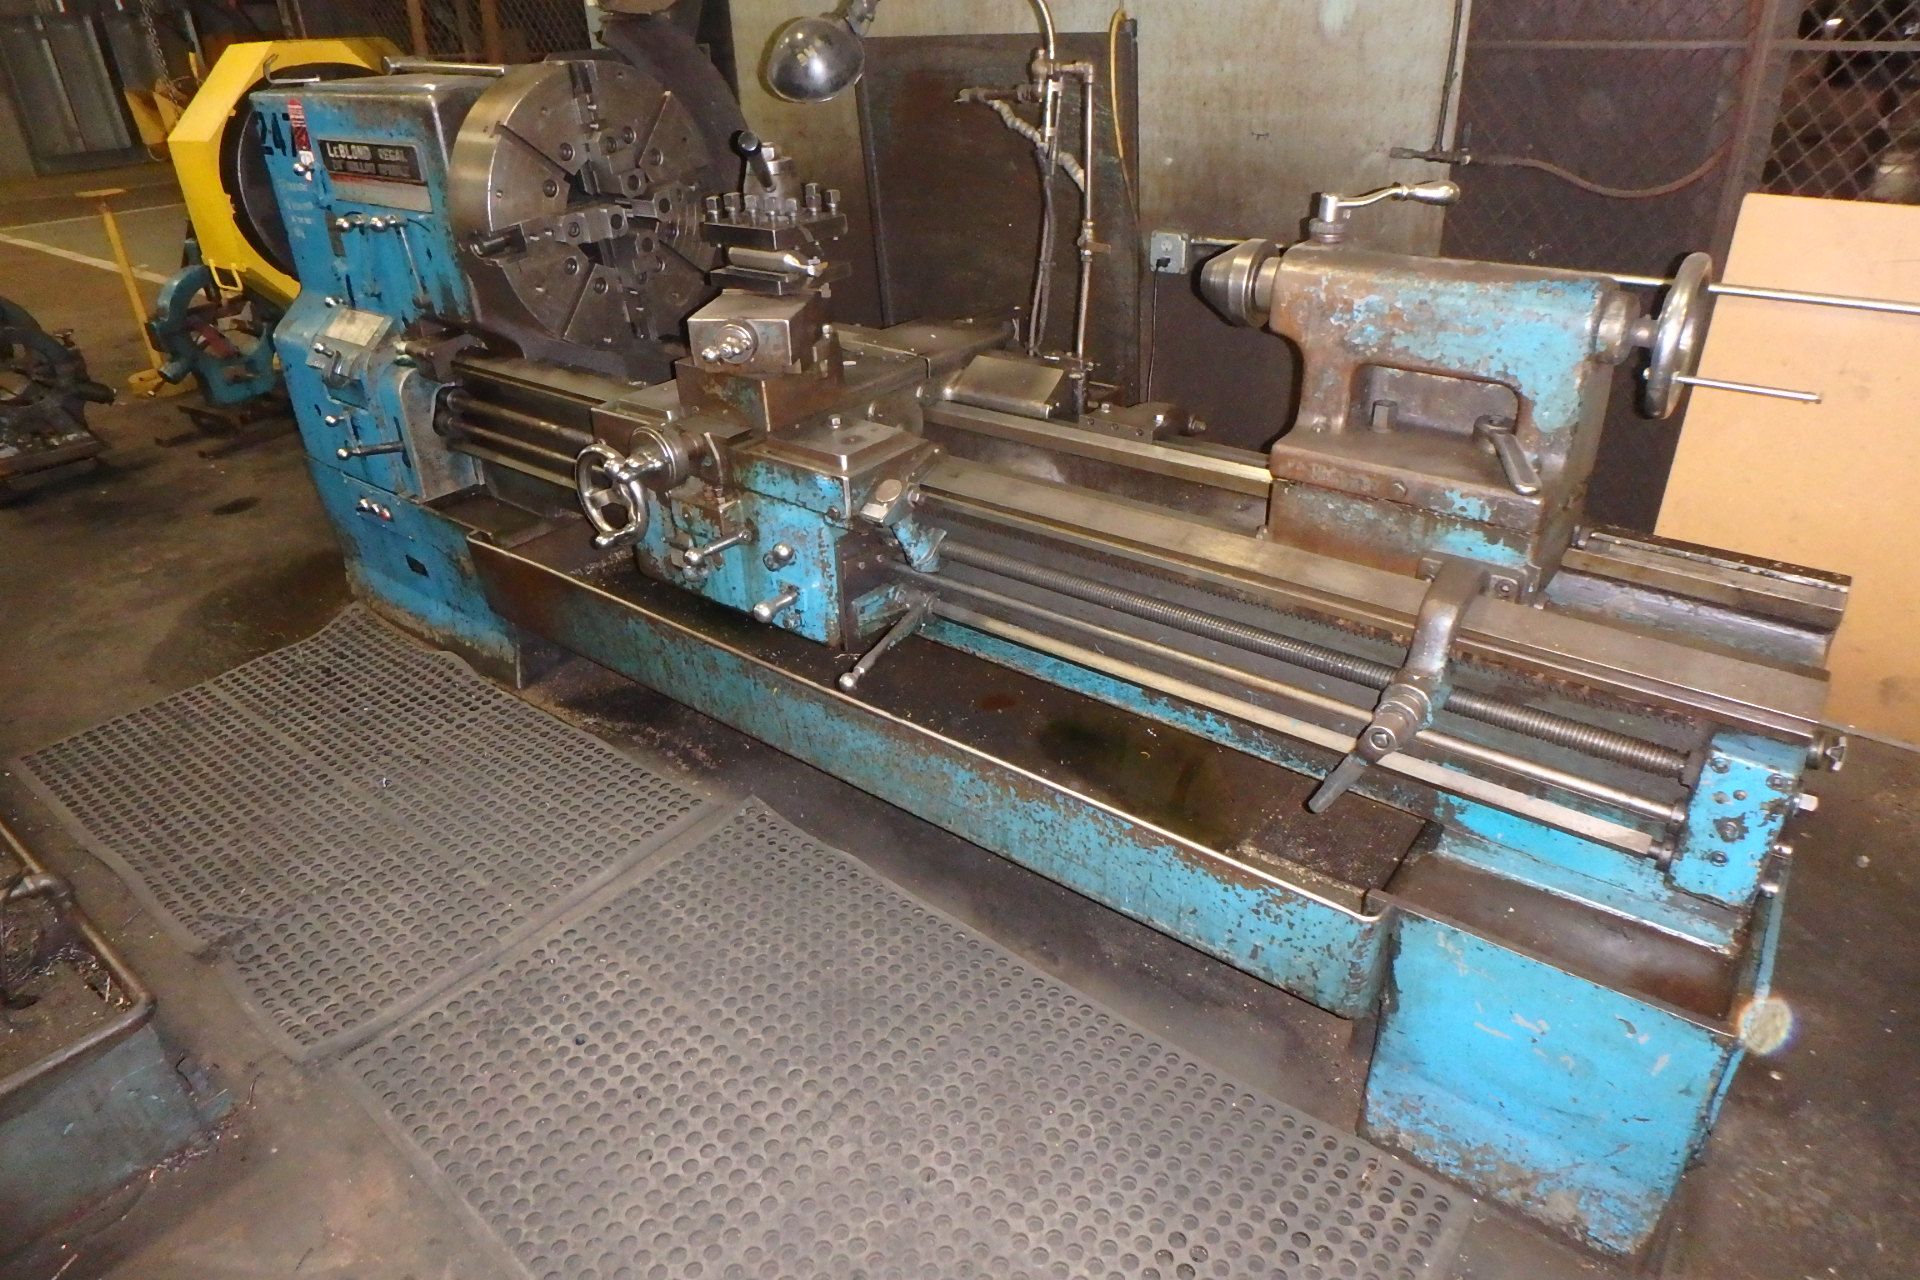 LEBLOND REGAL 28" x 60" Hollow Spindle Lathe, s/n 2H599, w/ 9" Spindle Hole, 24" 4-Jaw Chuck, 9-